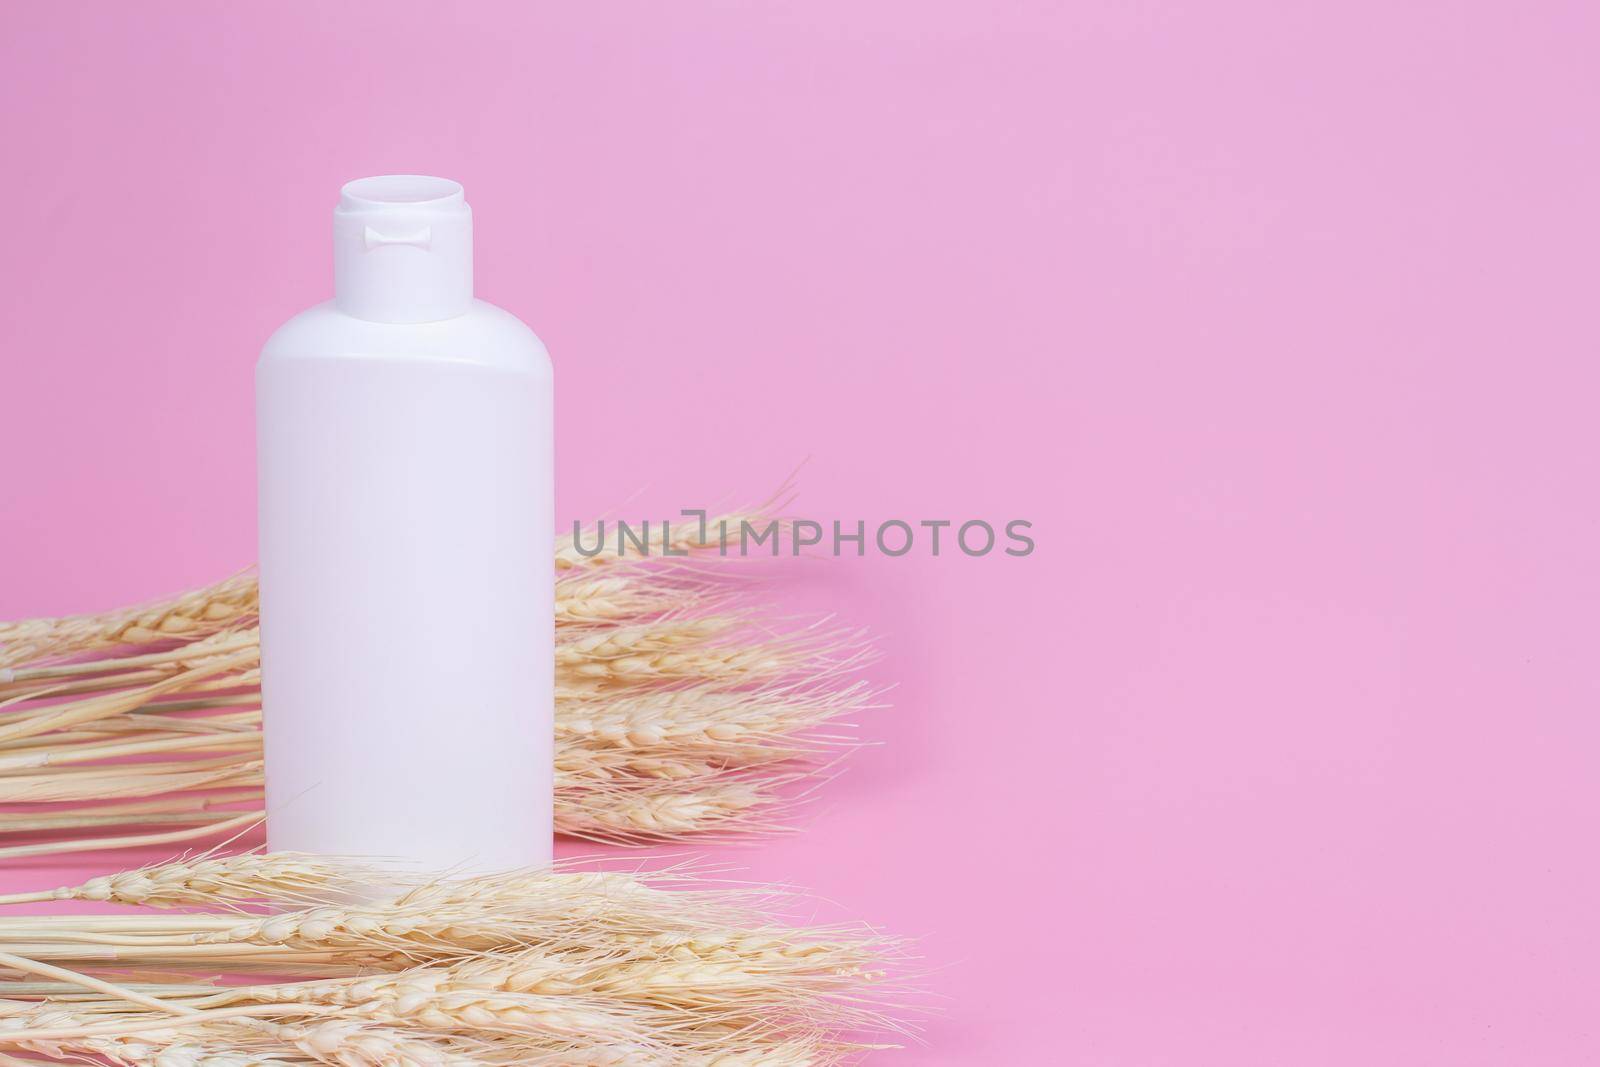 Blank cosmetics container and wheat ears on pink background. Cream or shampoo bottle mockup. by bySergPo